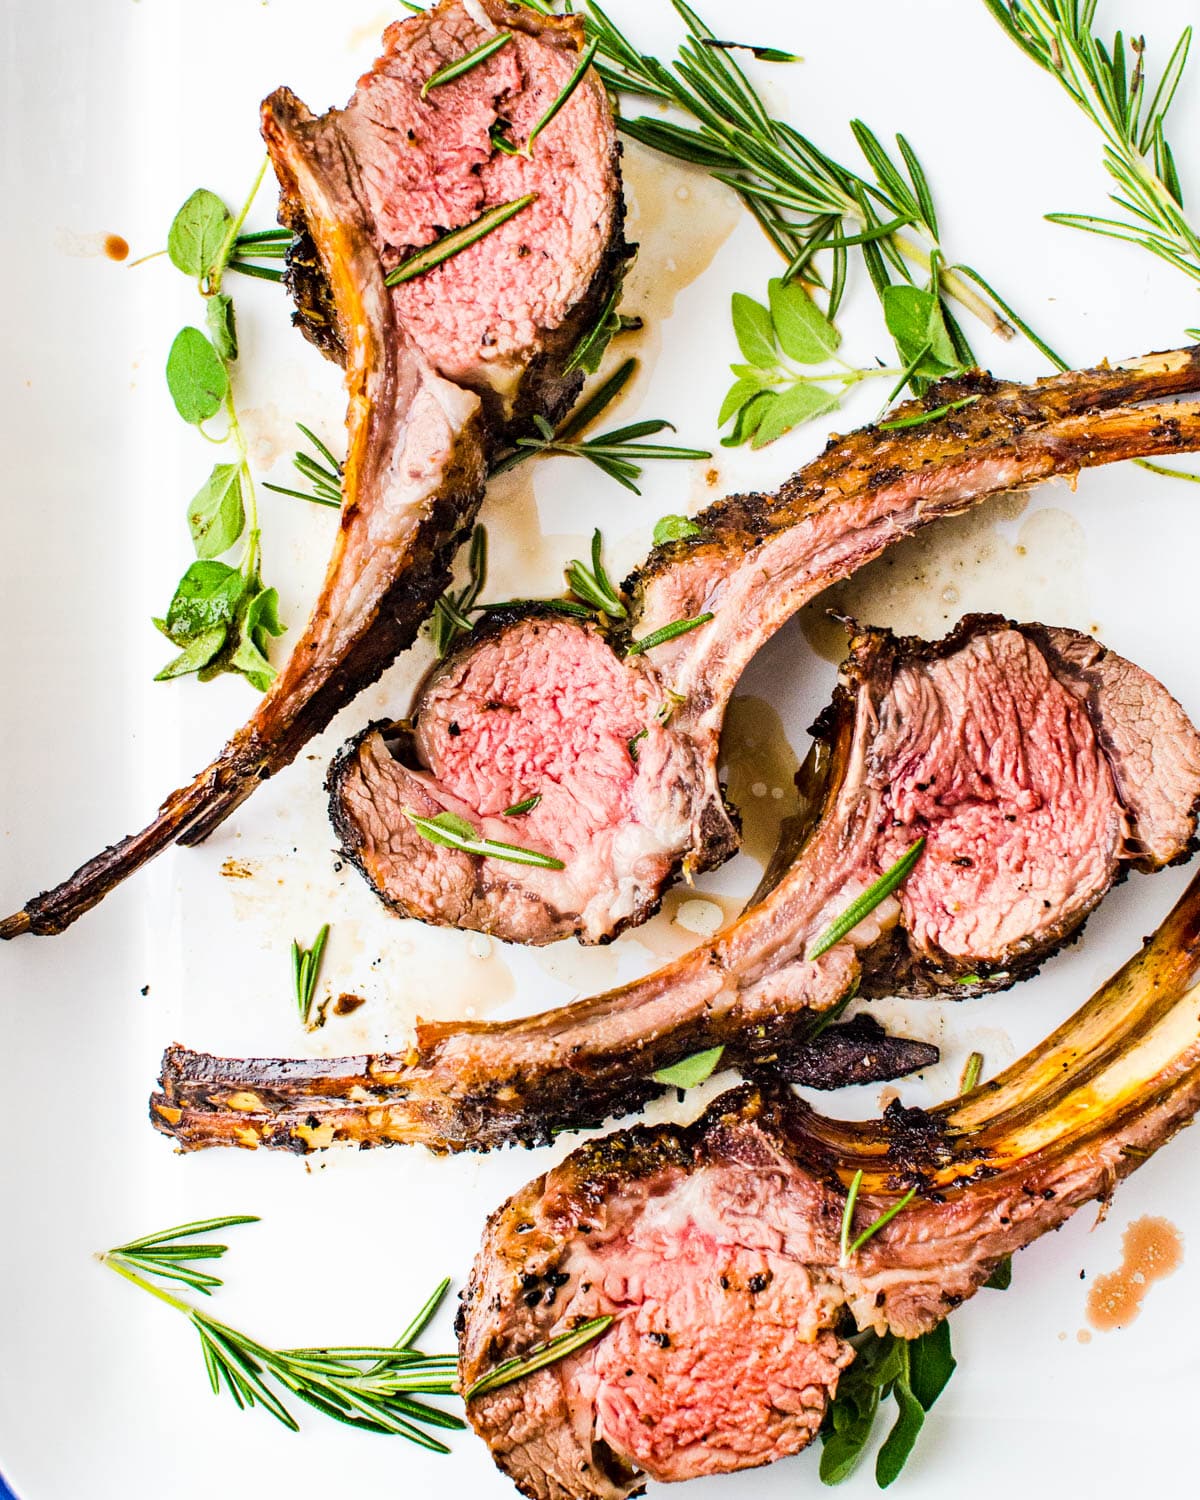 Grilled lamb rack cut into chops on a white platter.